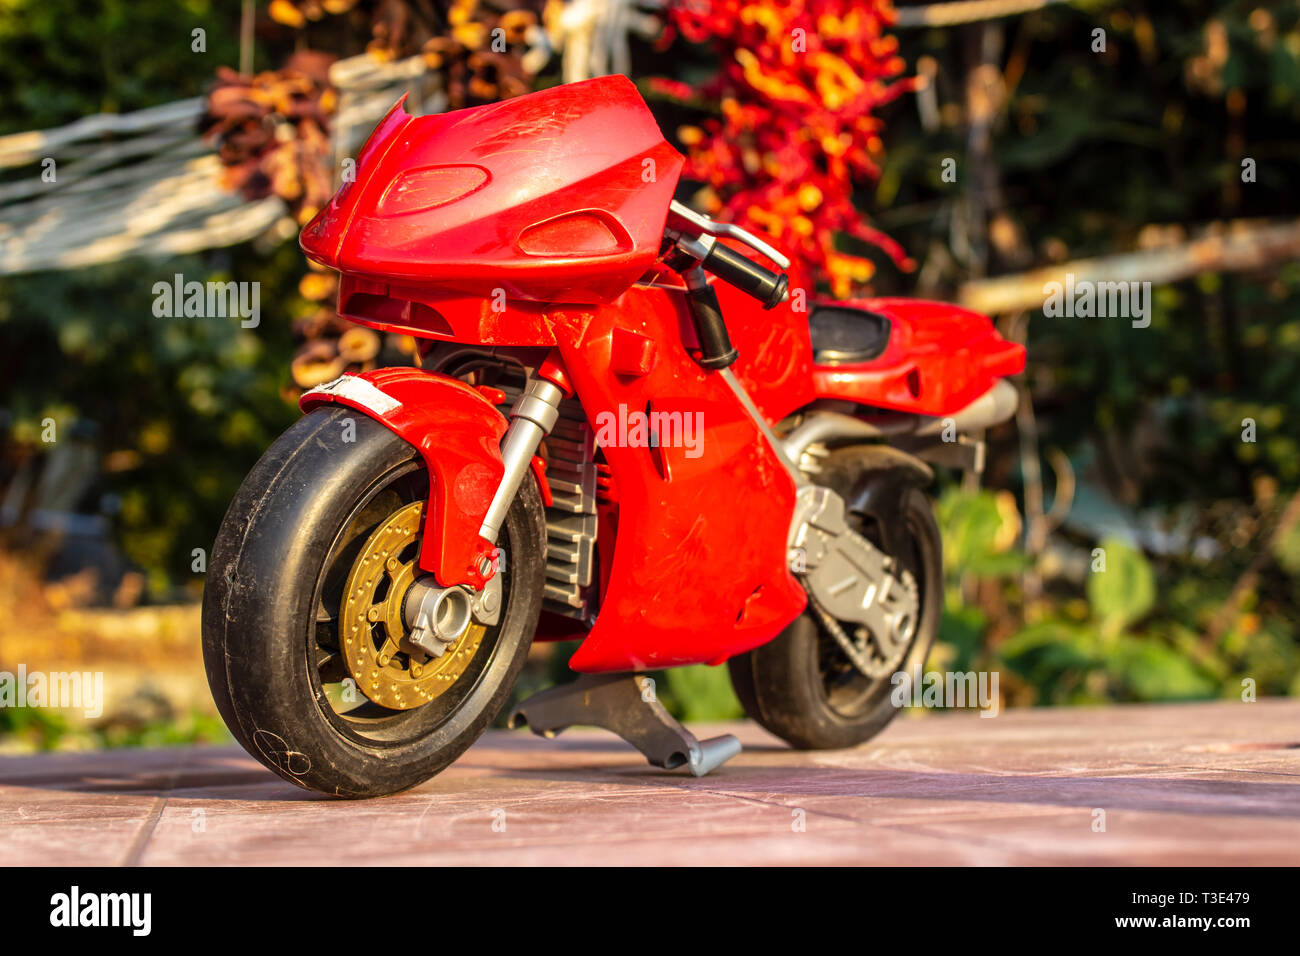 a isolated closeup red toy motorcycle with warm colors- front view. photo has taken from a garden. Stock Photo